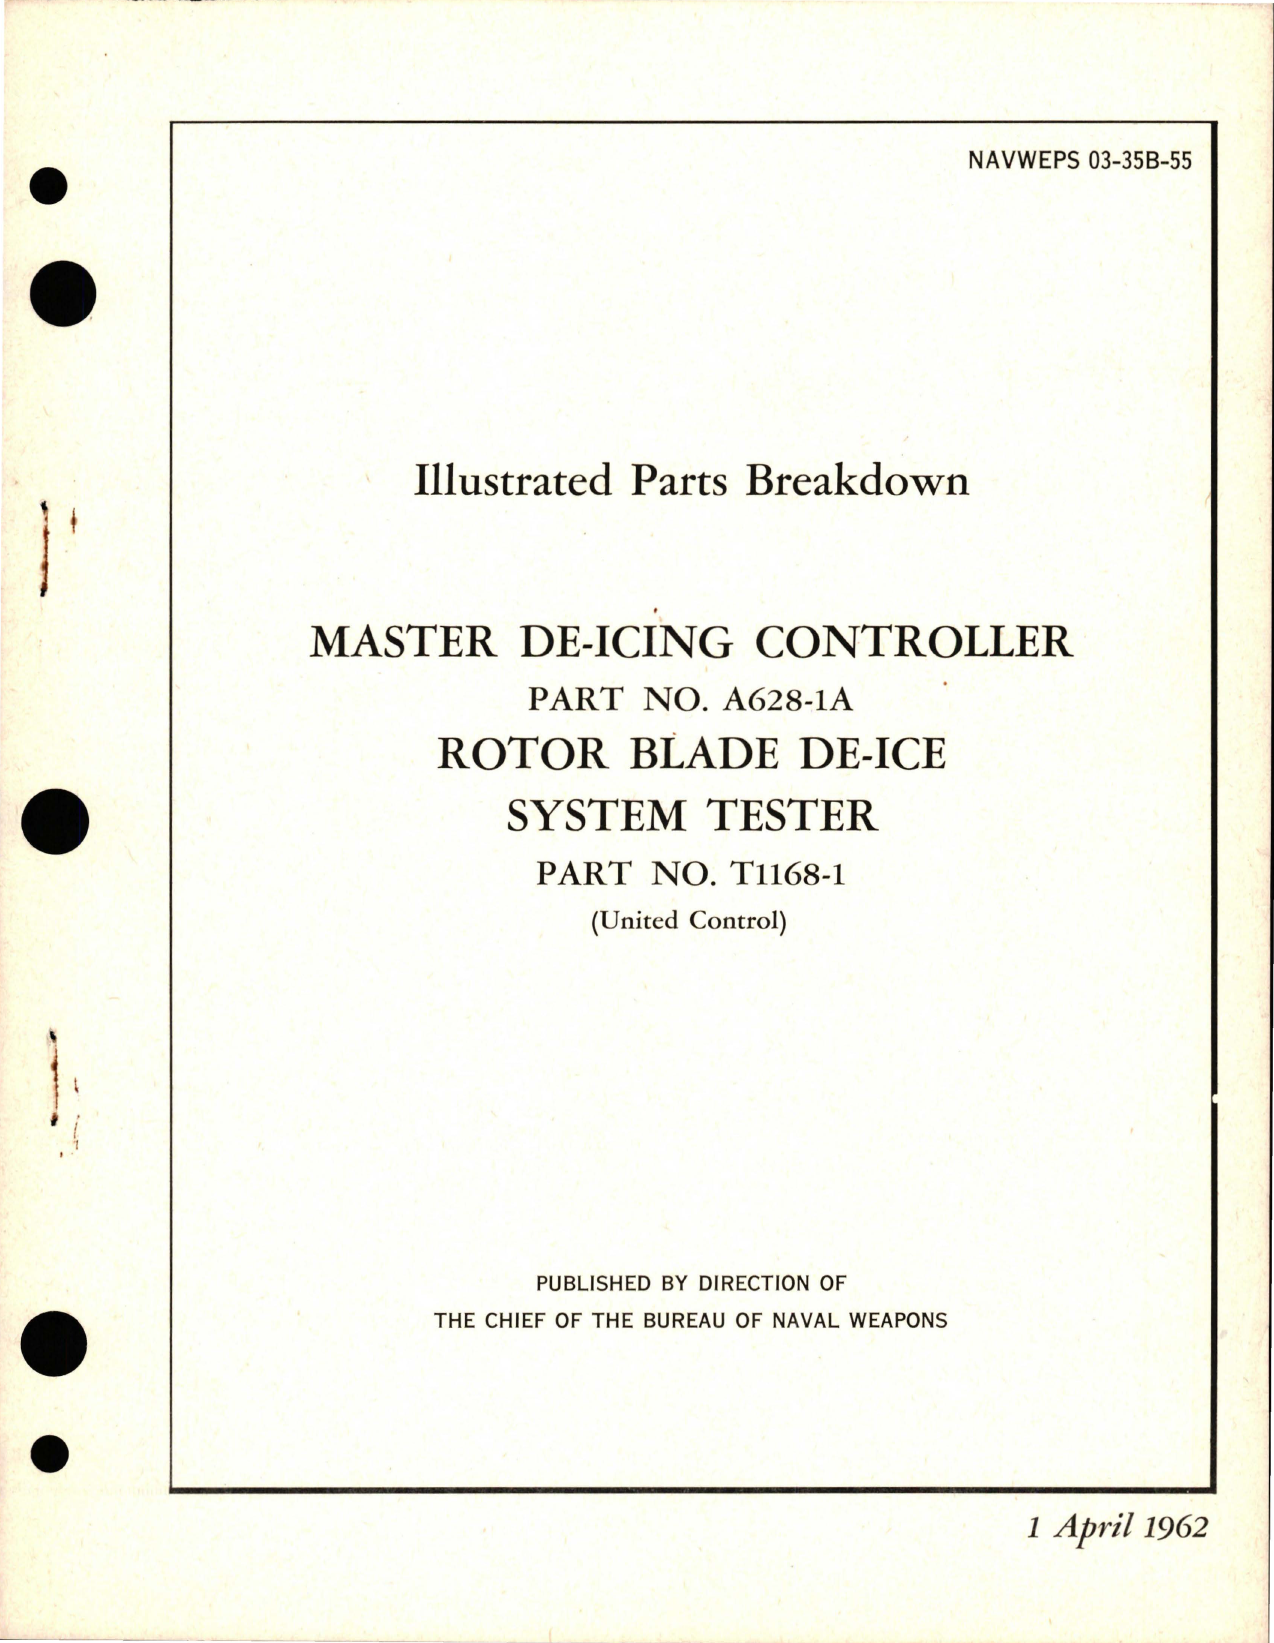 Sample page 1 from AirCorps Library document: Illustrated Parts Breakdown for Master De-Icing Controller and Rotary Blade De-Ice System Tester